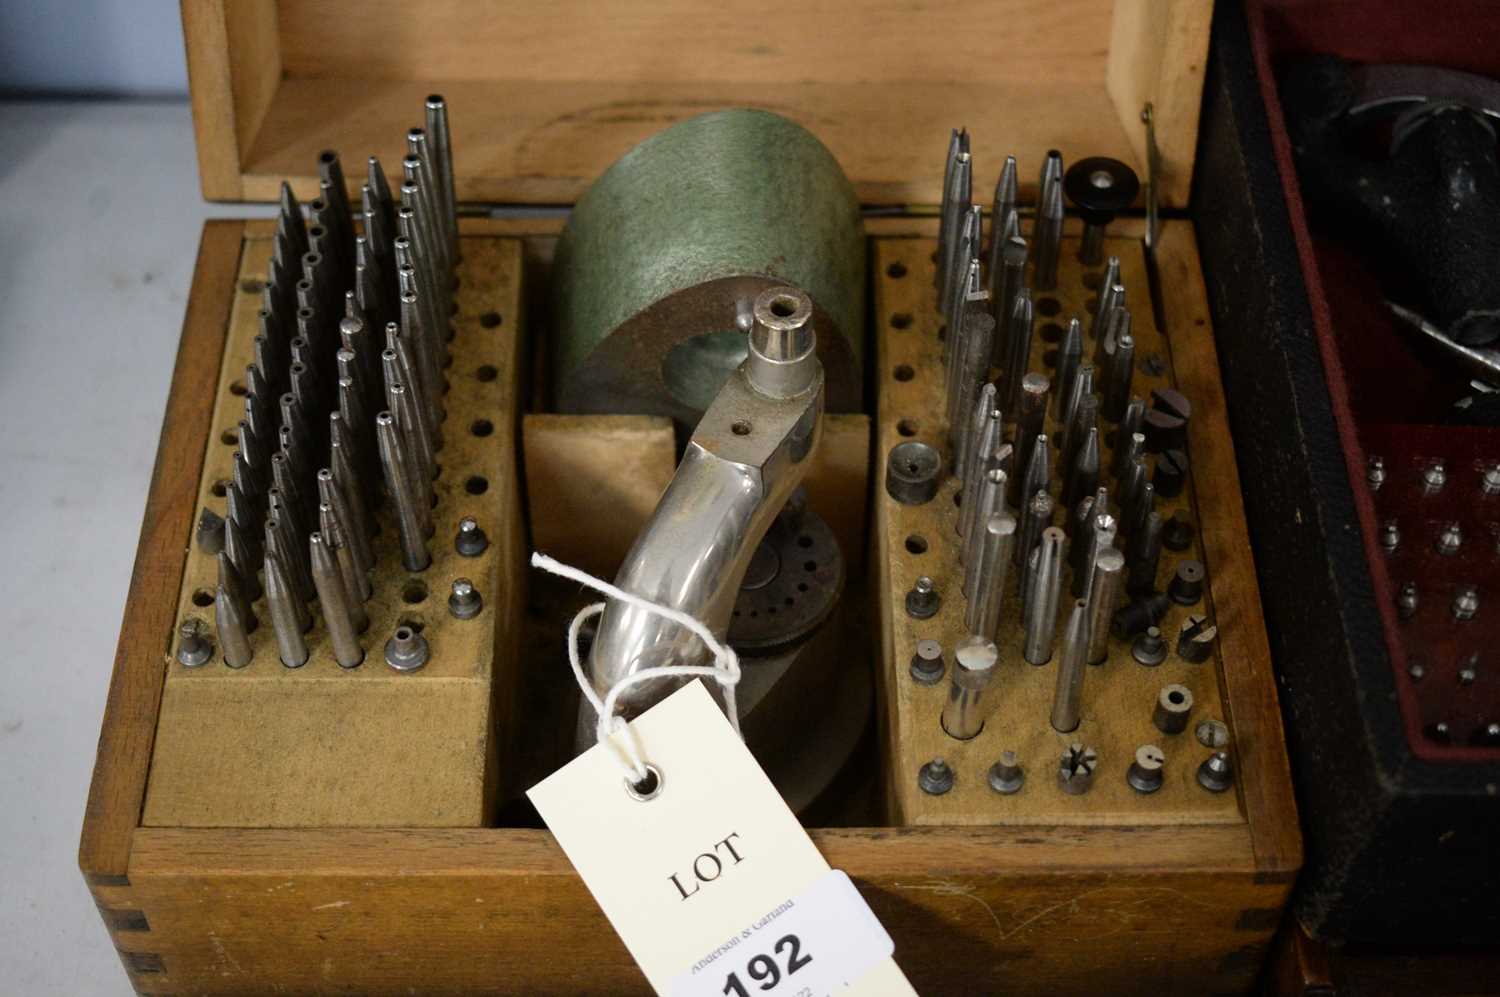 Lot 192 - A Swiss Seitz watchmakers staking tool or jewel press